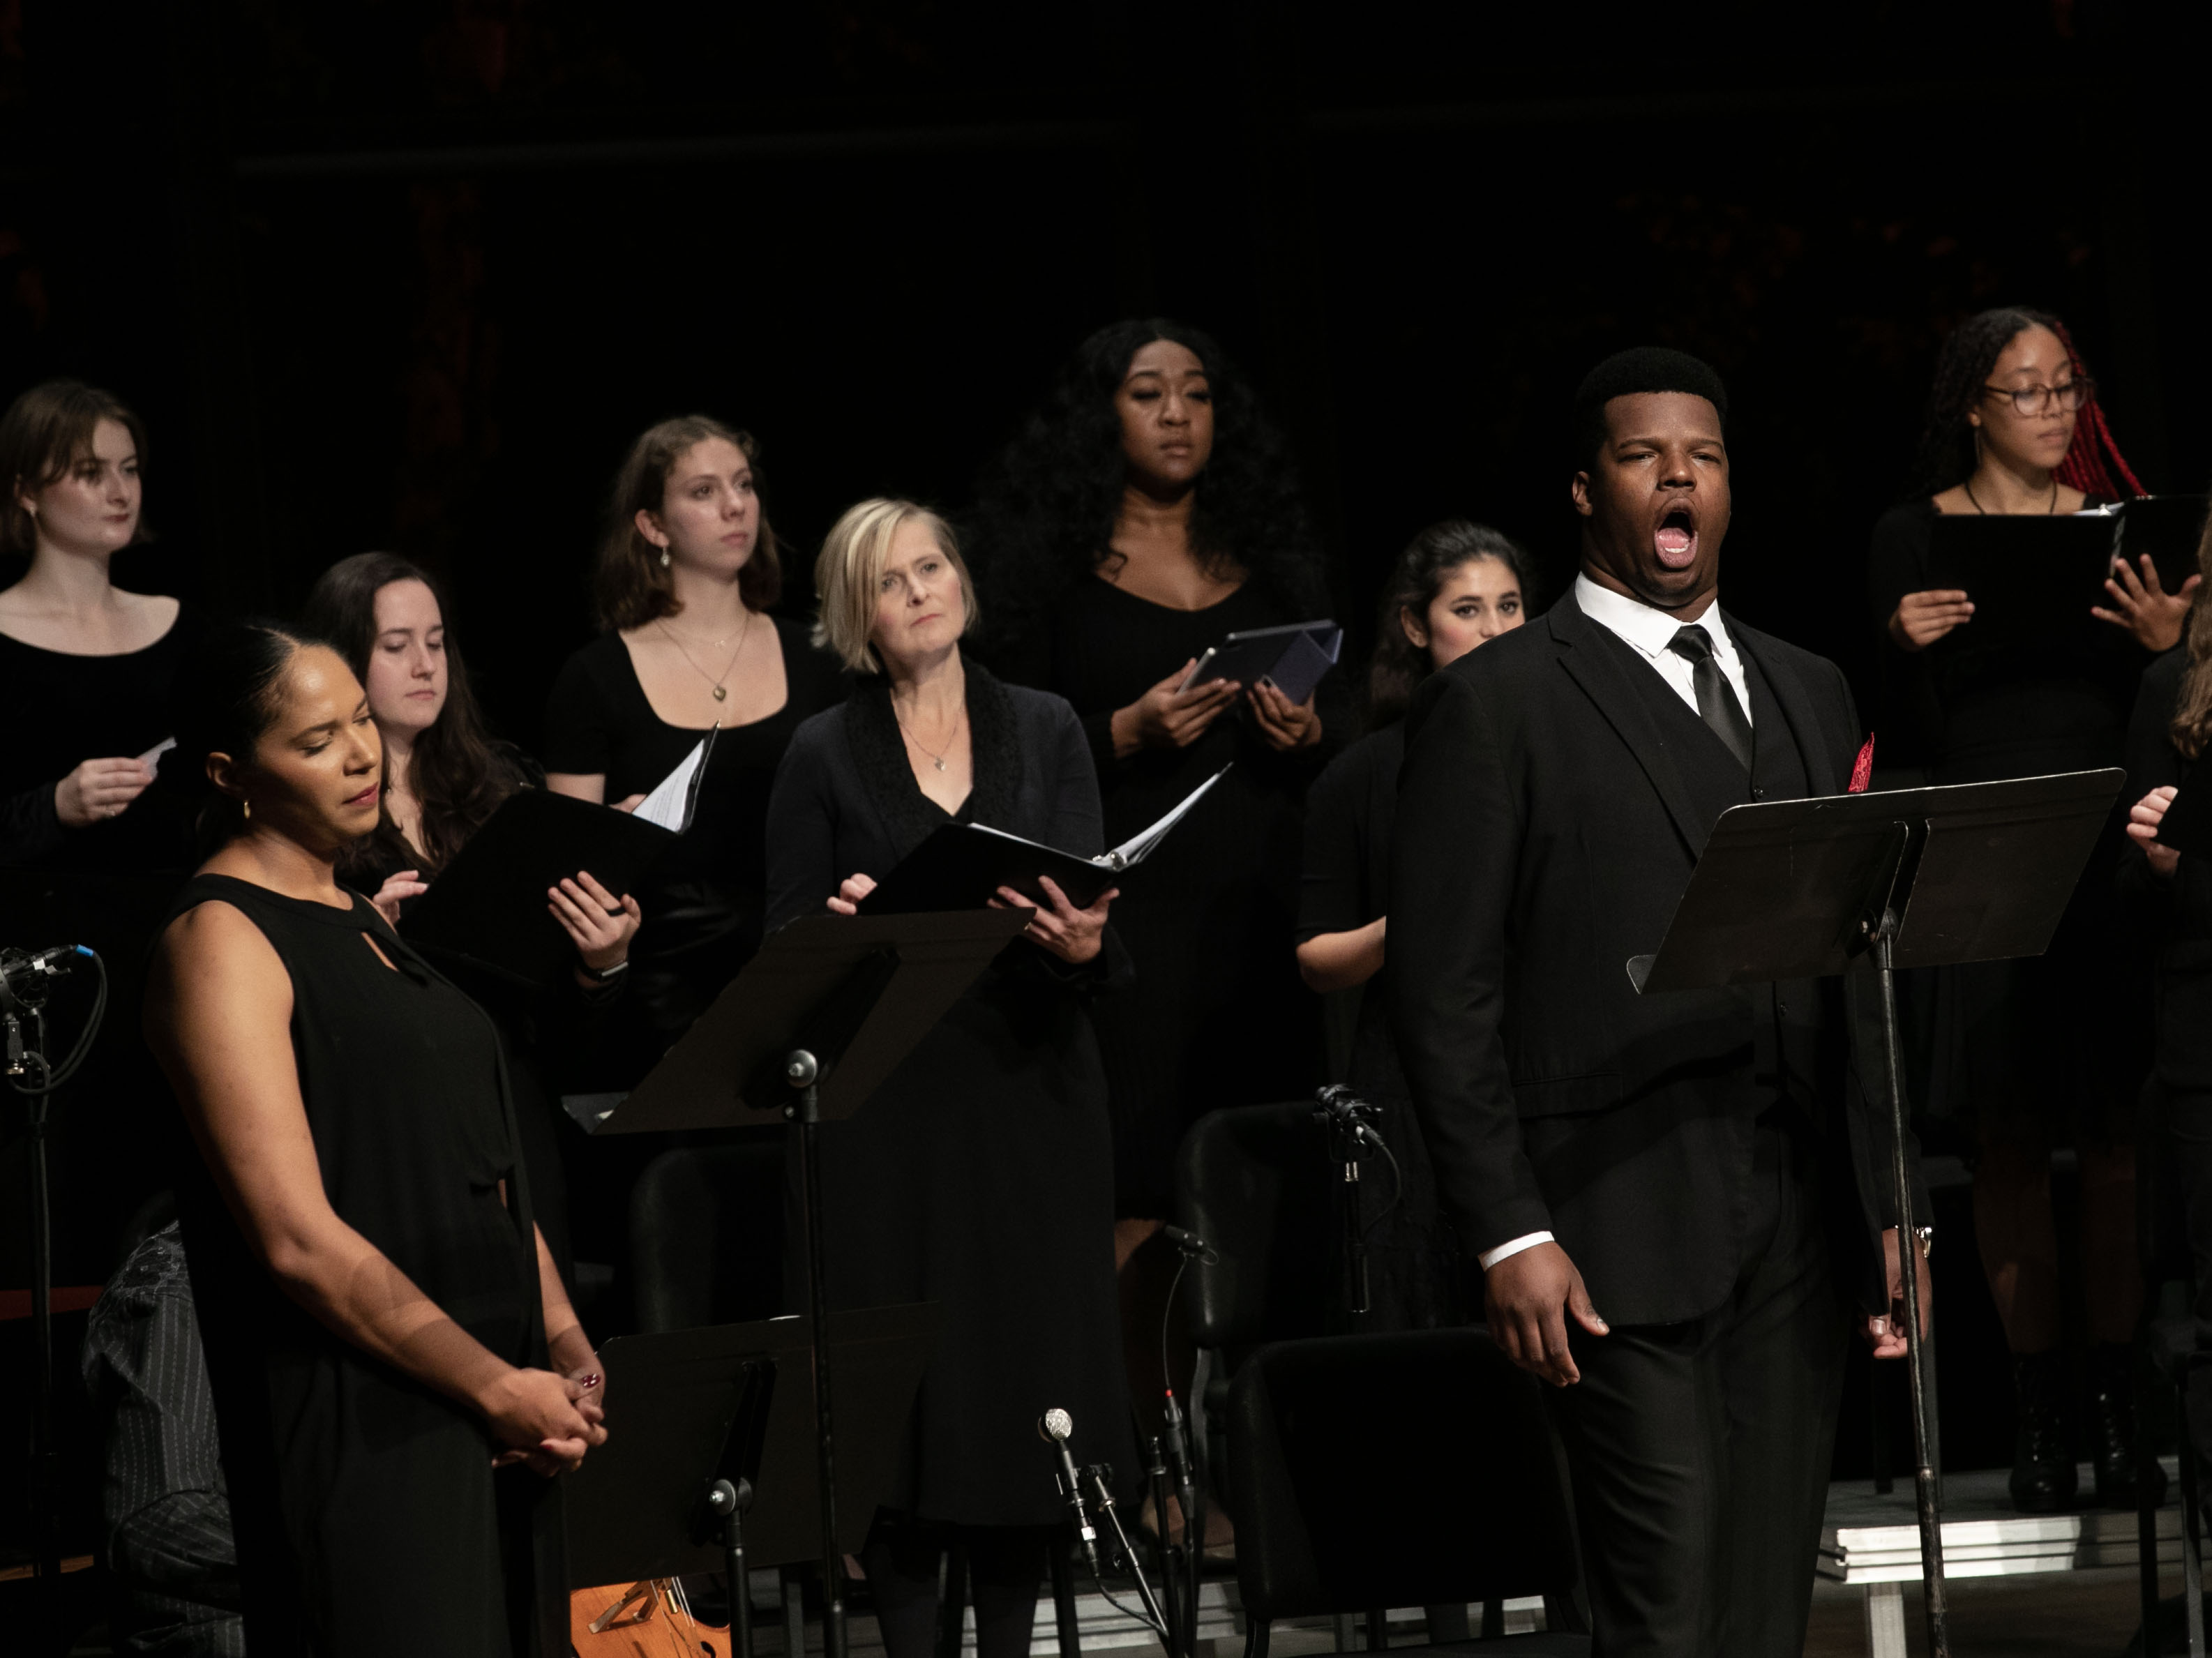 A choir dressed in black performs "The Unhealed Wound" passionately.